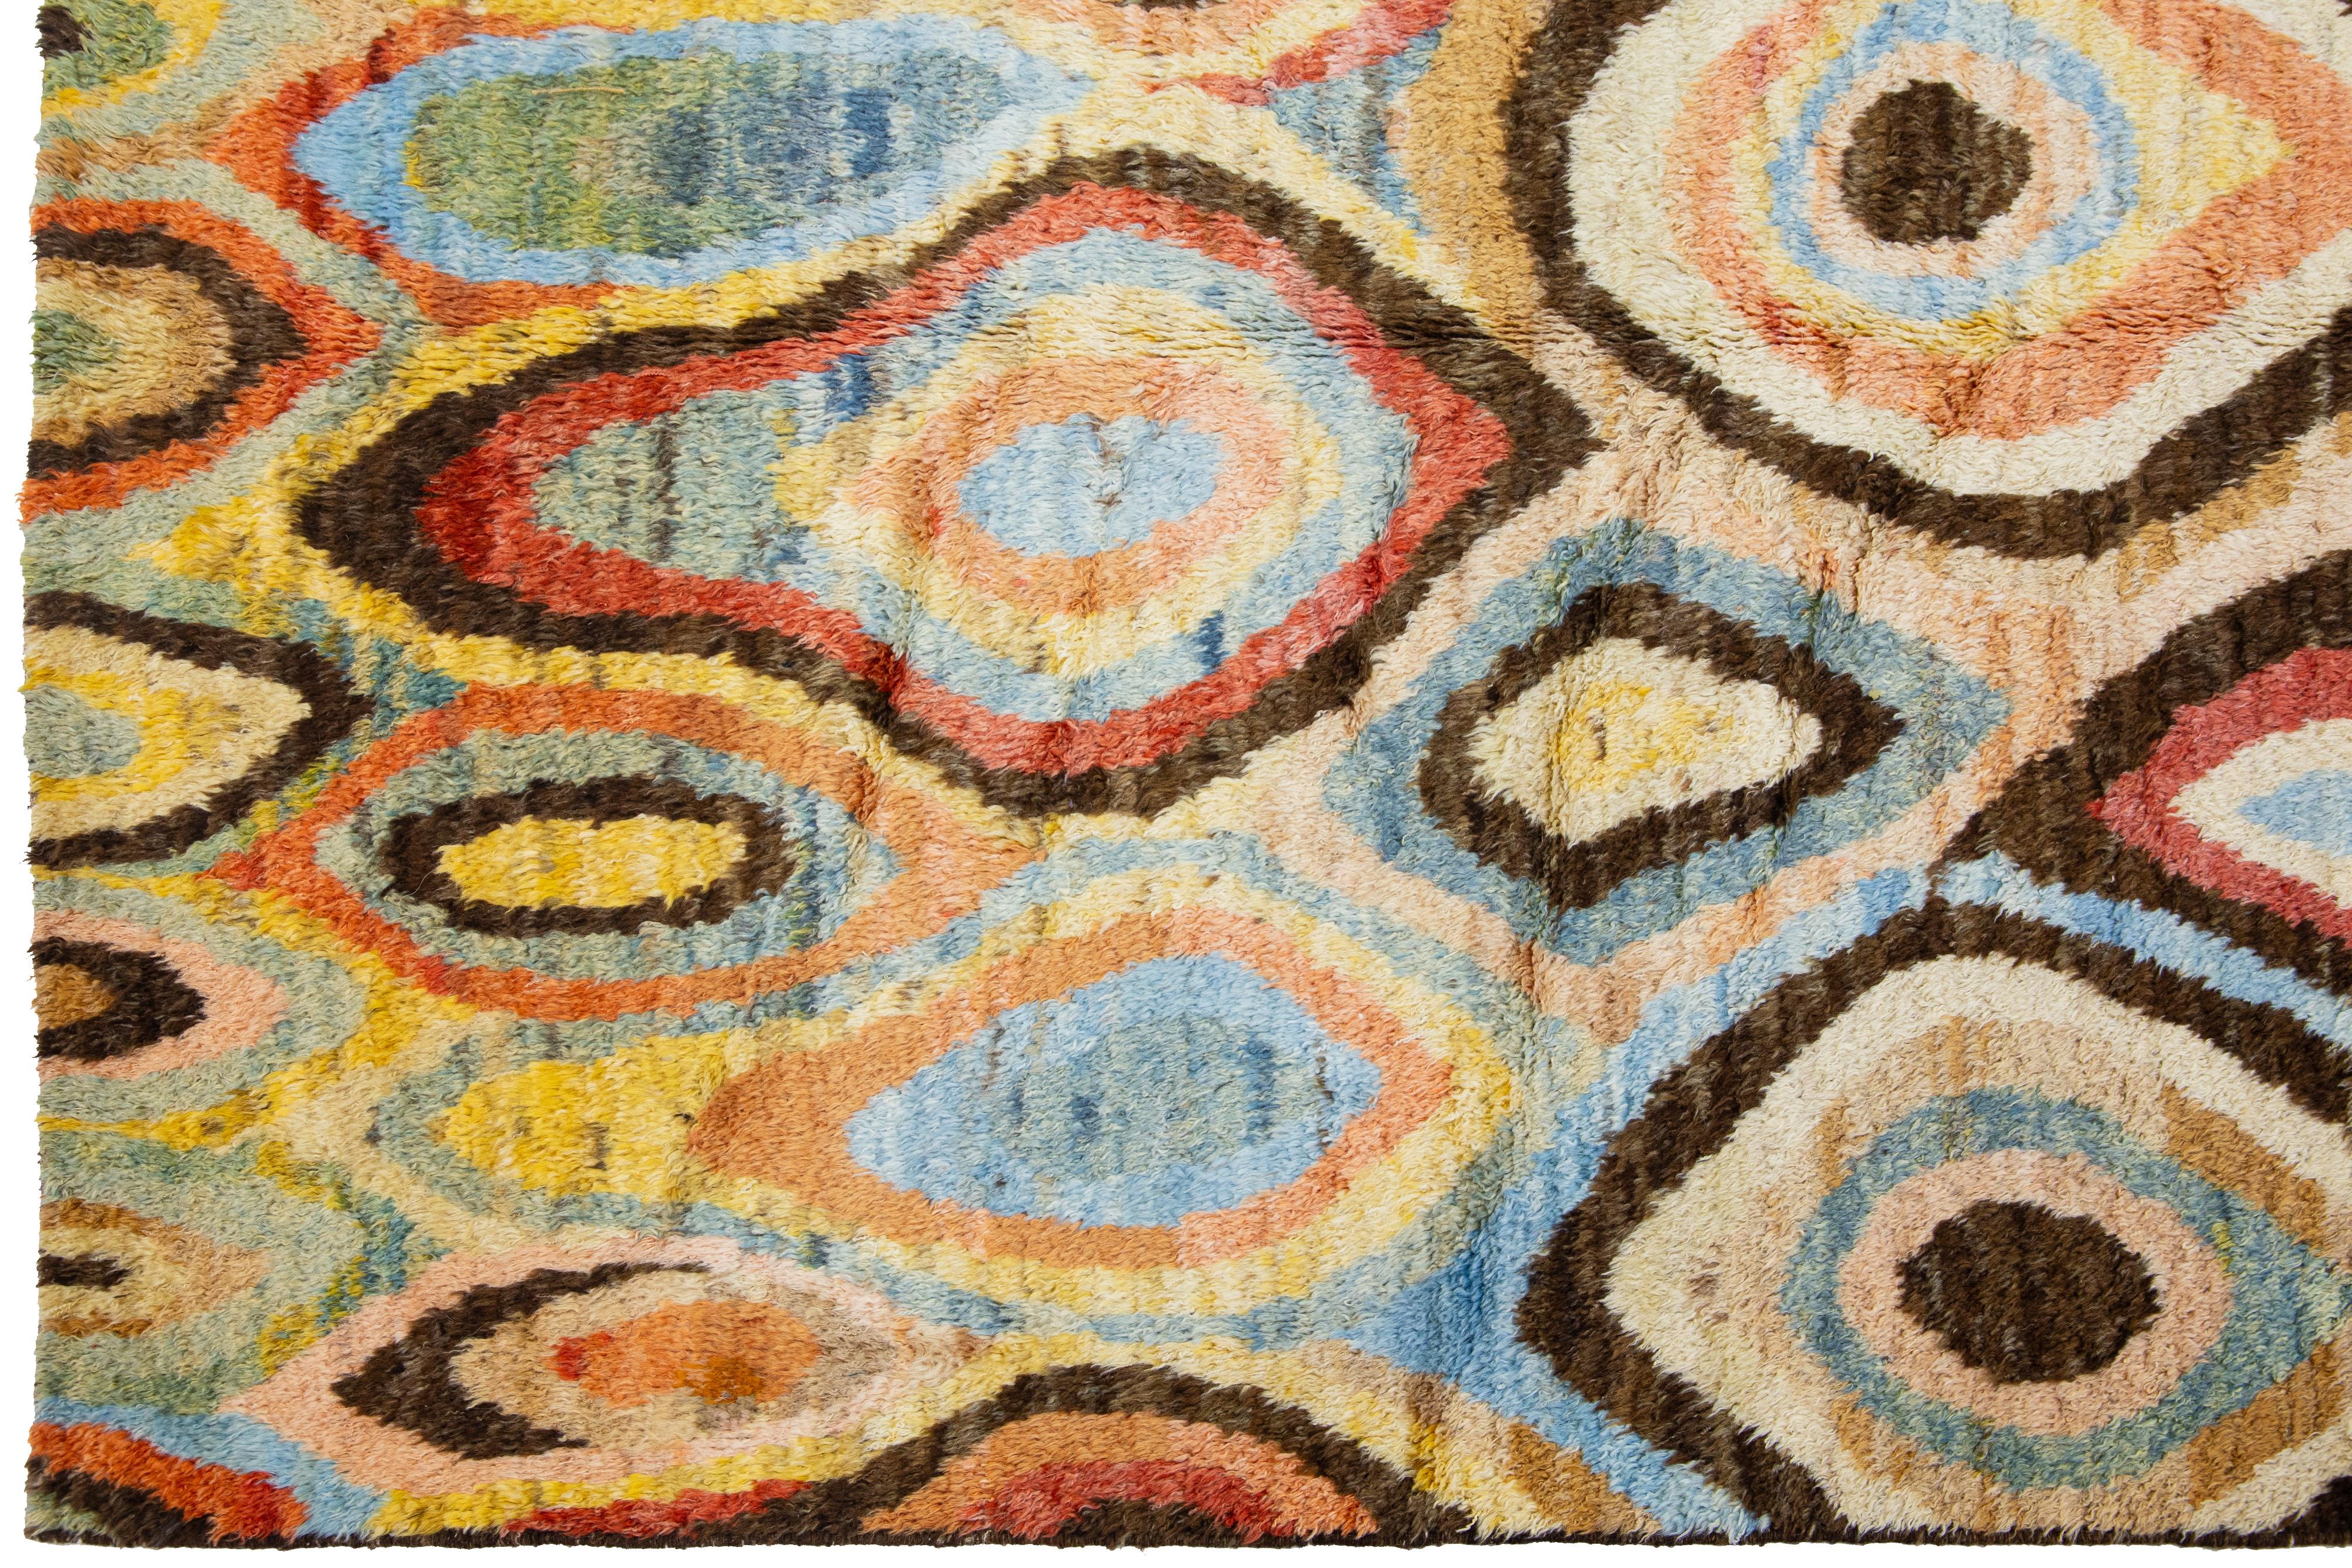 Contemporary Handmade Moroccan-Style Wool Rug In Multicolor by Apadana In New Condition For Sale In Norwalk, CT